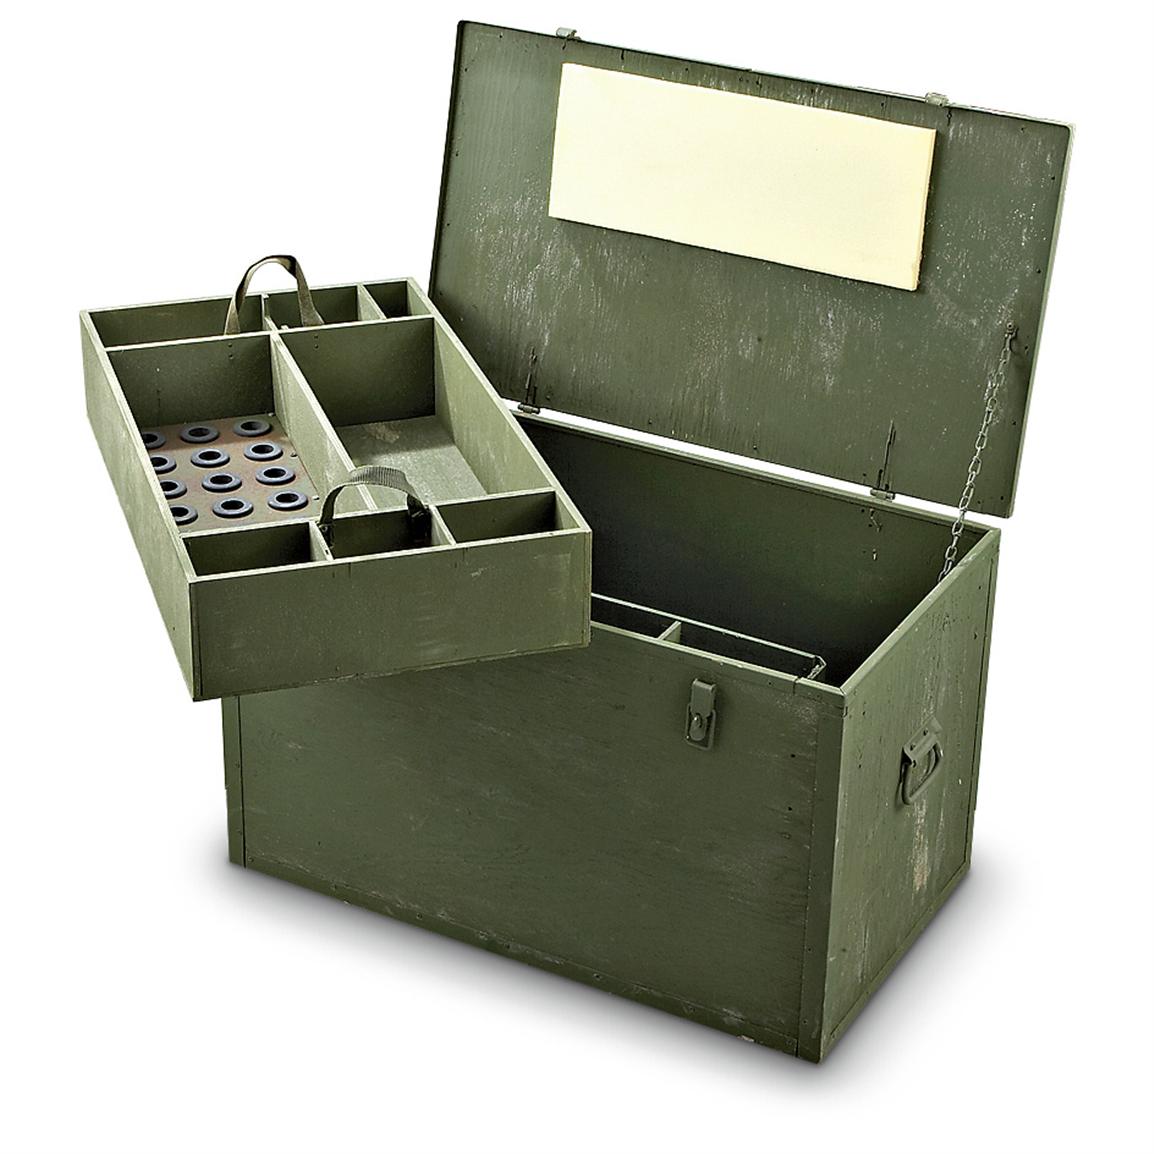 New U.s. Military Wood Storage Box, Olive Drab - 156647, Storage Containers At Sportsman'S Guide